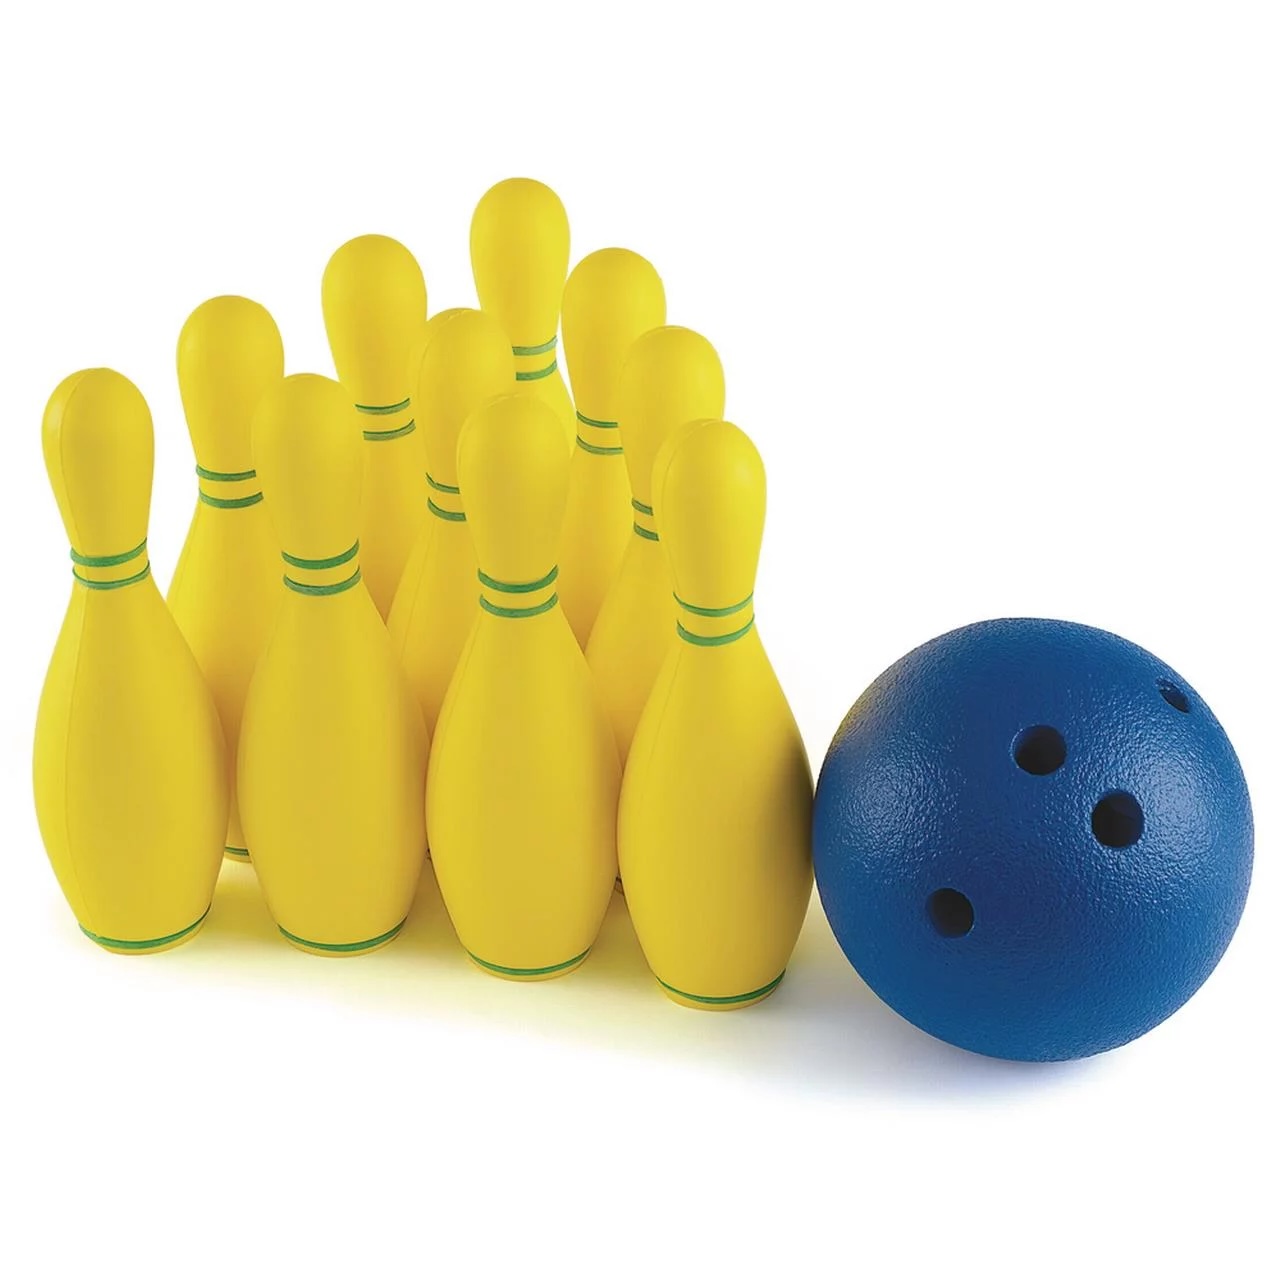 Review: Bowling Set – A Fun and Affordable Game for All Ages